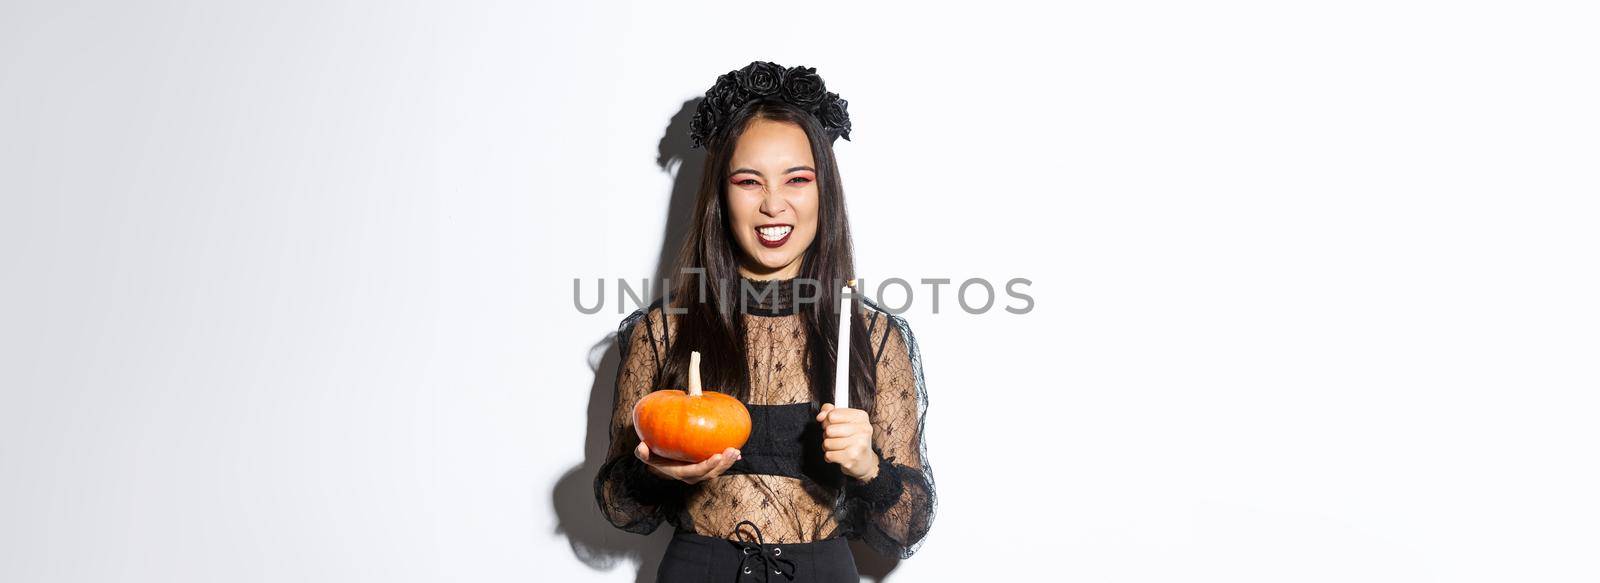 Image of asian evil witch in gothic lace dress and black wreath, laughing and grimacing, holding candle with pumpkin, celebrating halloween.